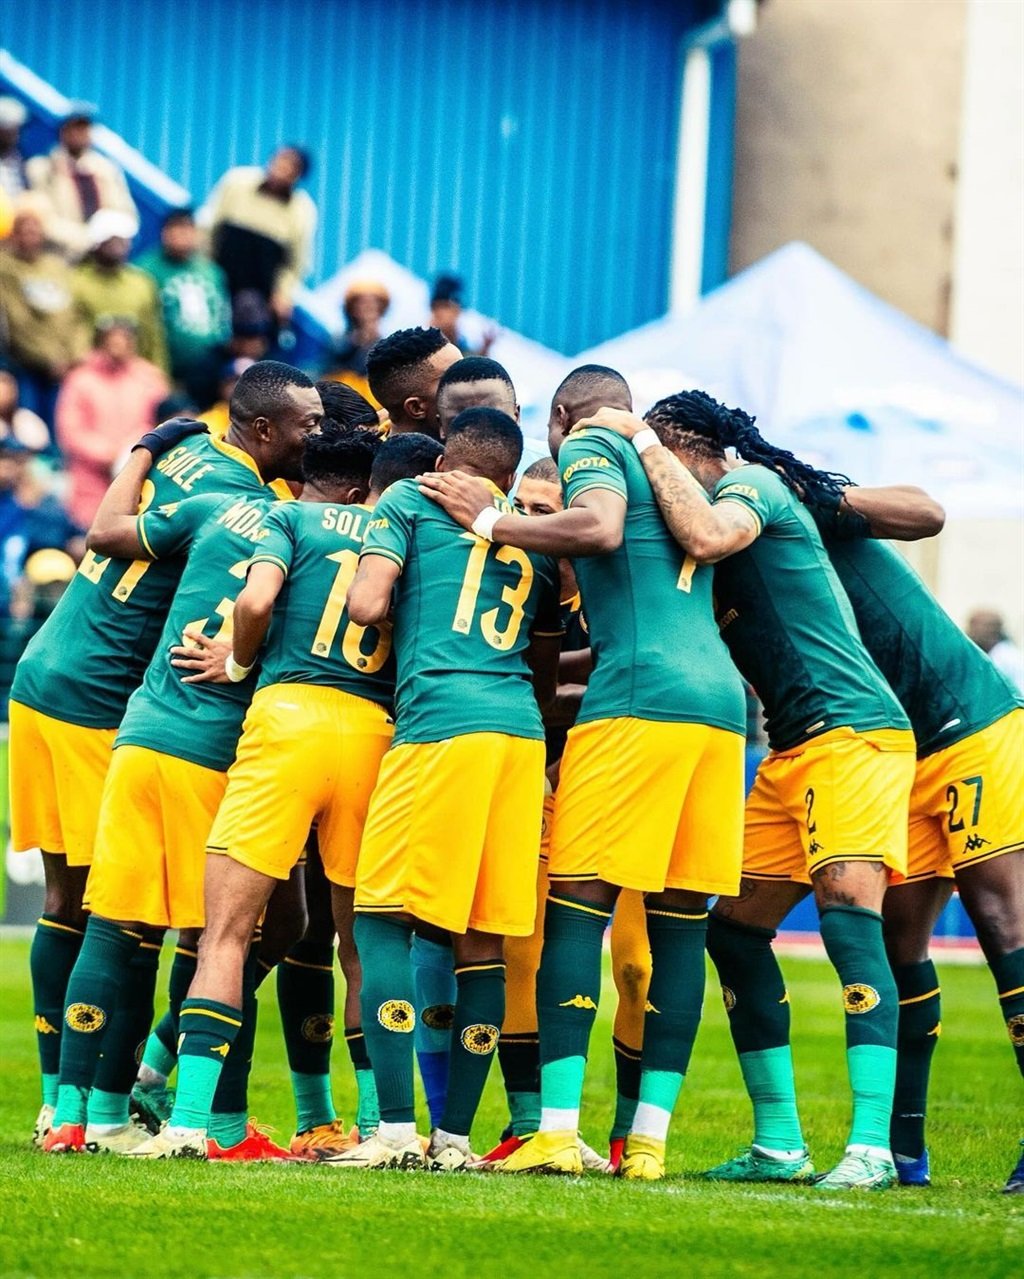 The Khosi Nation in East London let their feelings be known to the Kaizer Chiefs players after their crushing defeat to Chippa United.